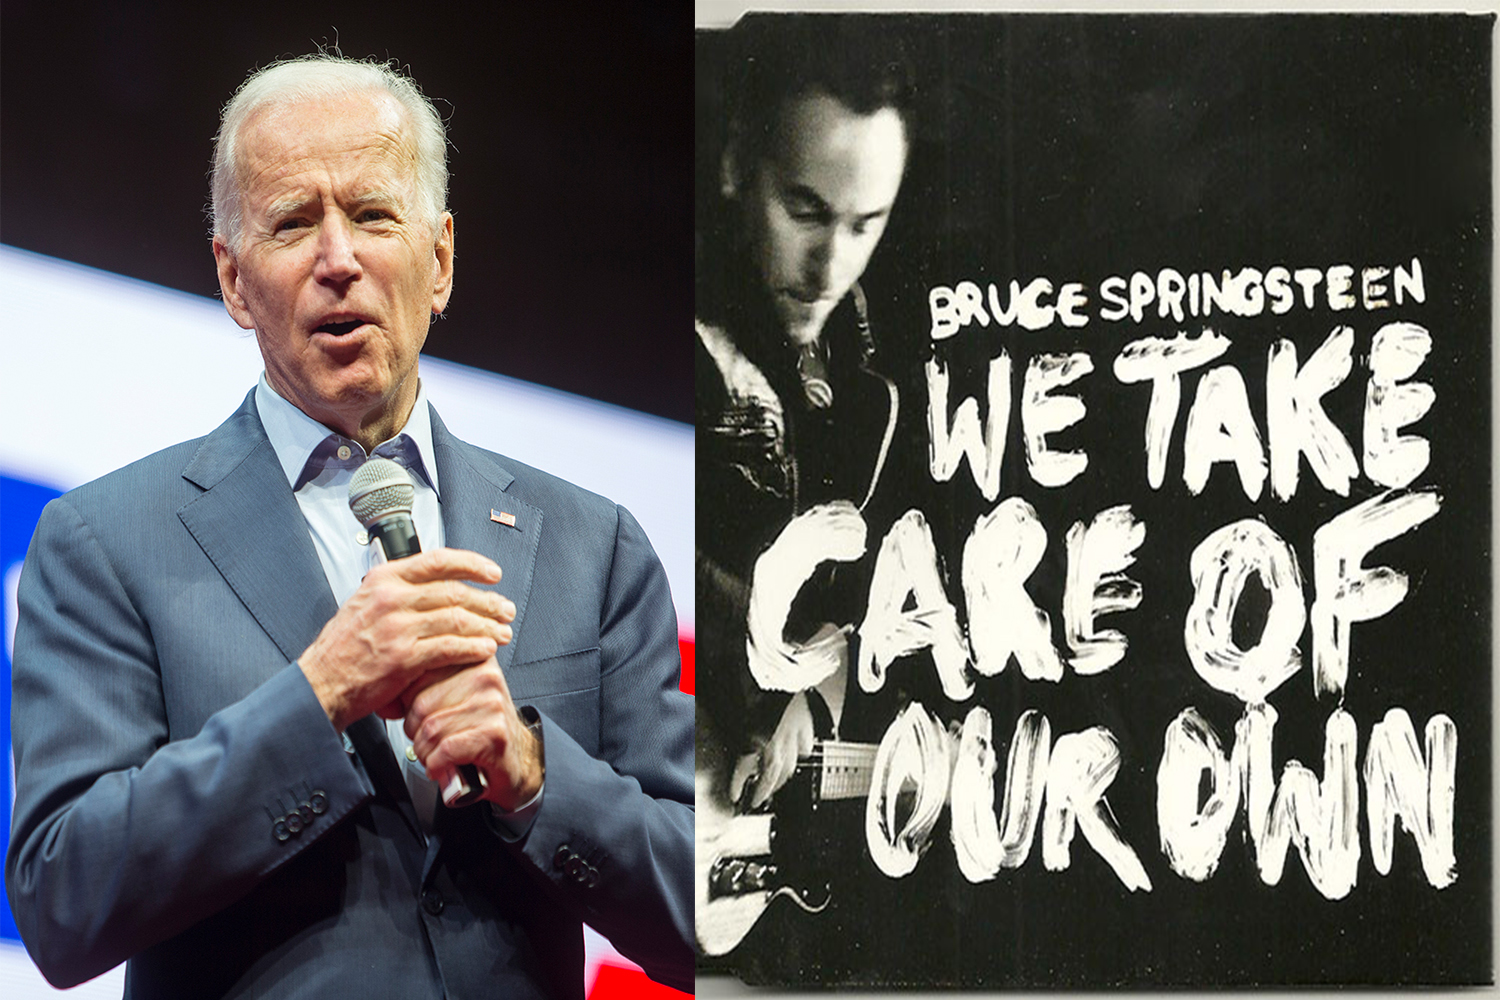 Joe Biden, Former Vice President: “We Take Care of Our Own” by Bruce Springsteen